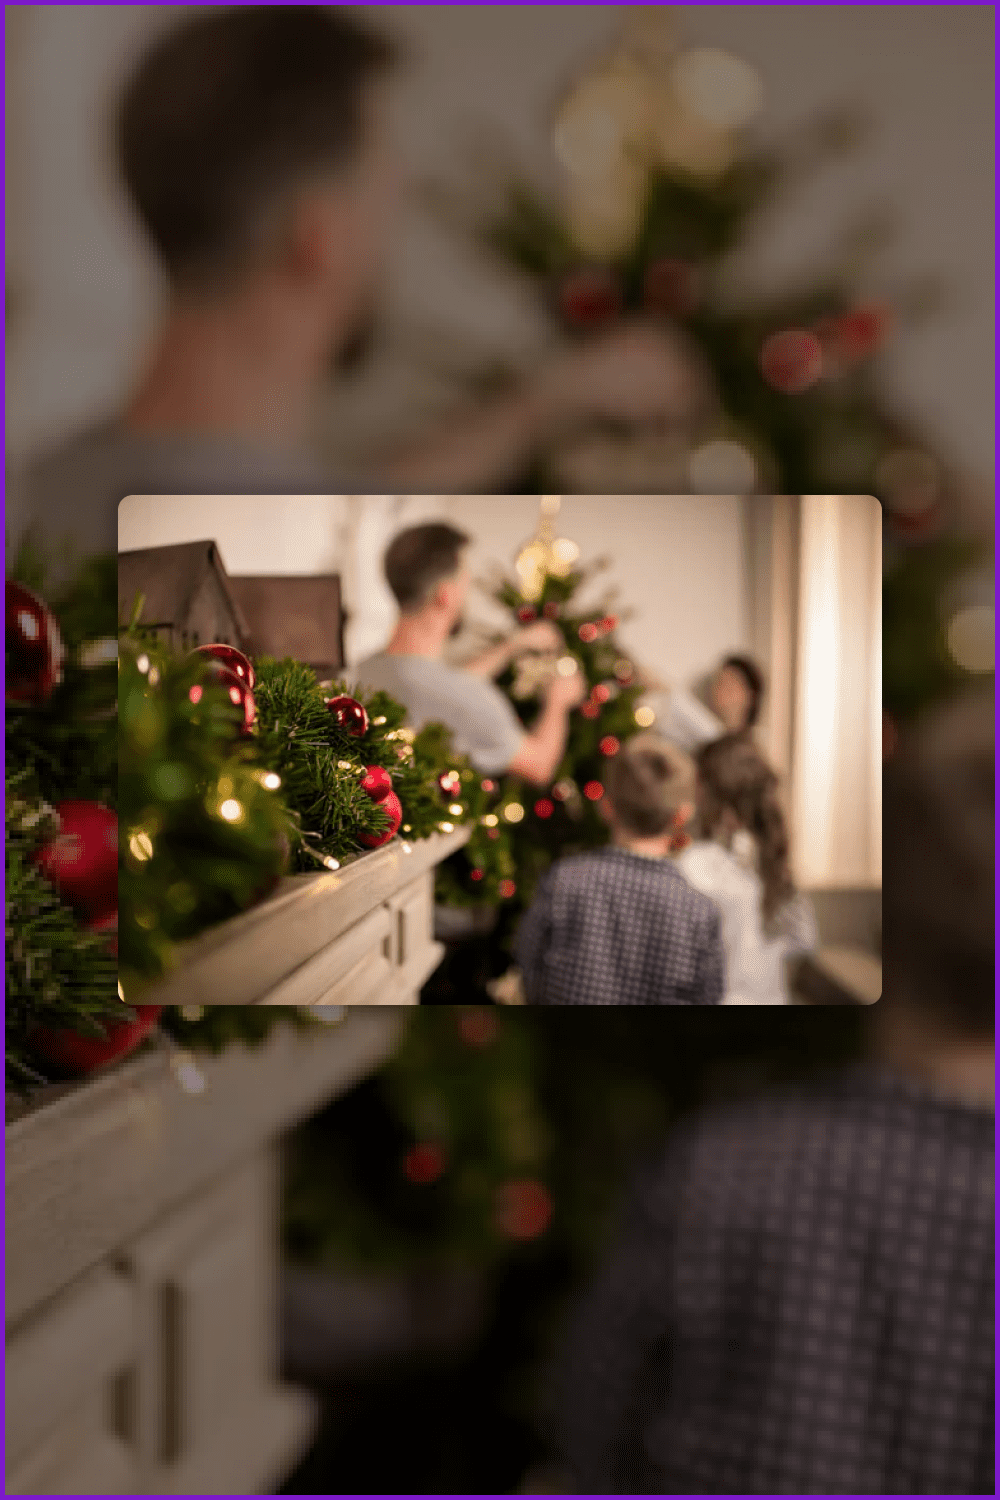 Photo of a family decorating a Christmas tree.